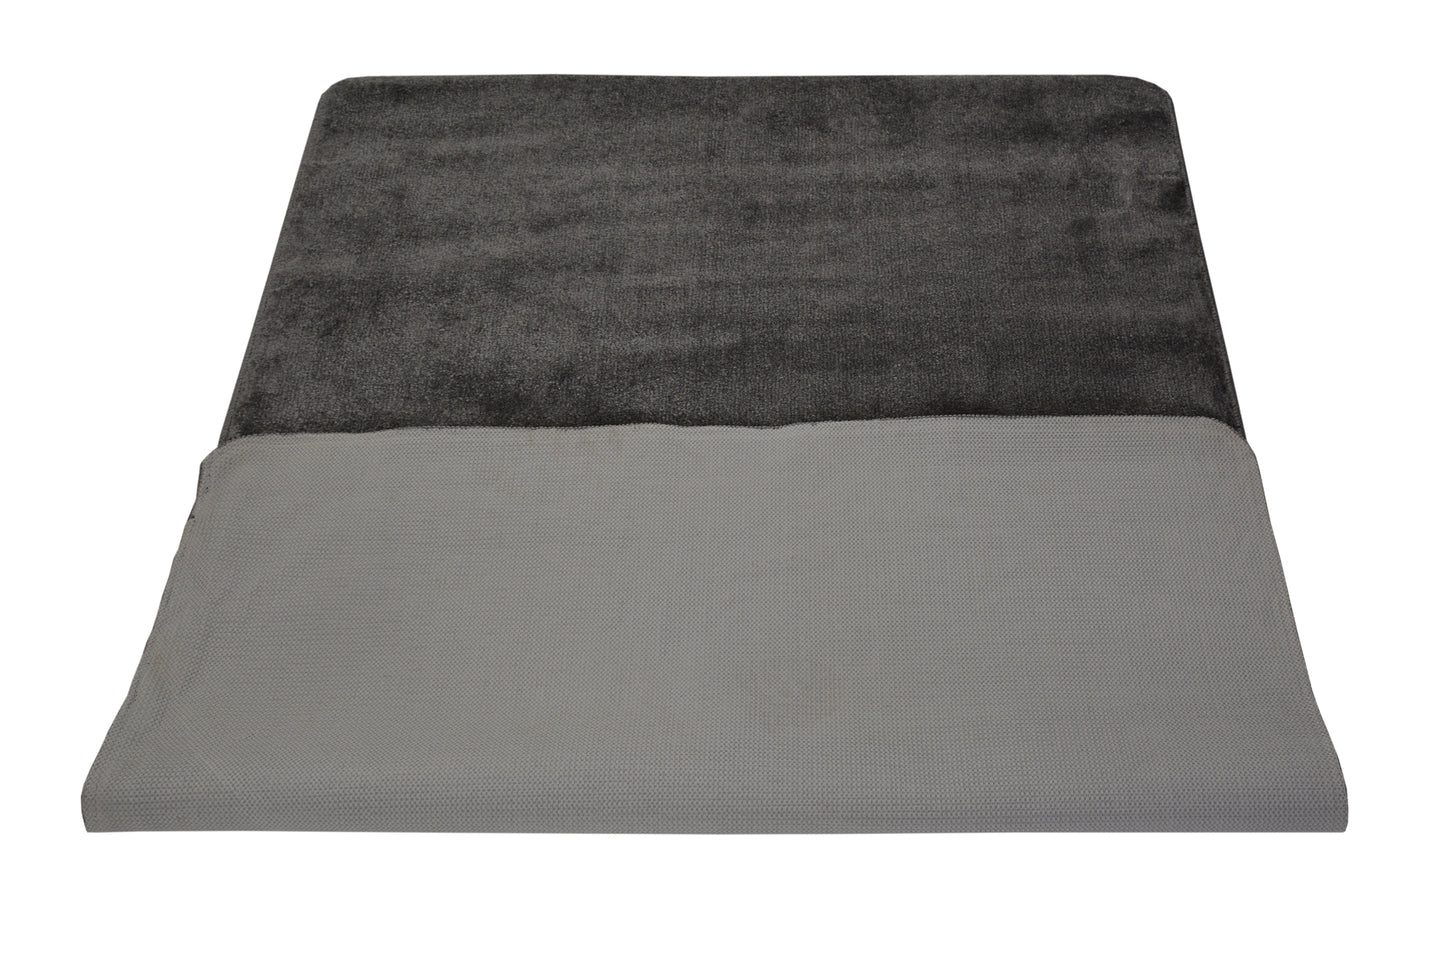 Euro Collection Solid Color Area Rug Rugs Slip Skid Resistant Rubber Backing Machine Washable (Grey, 5 x 7 (4'11" x 6'6"))